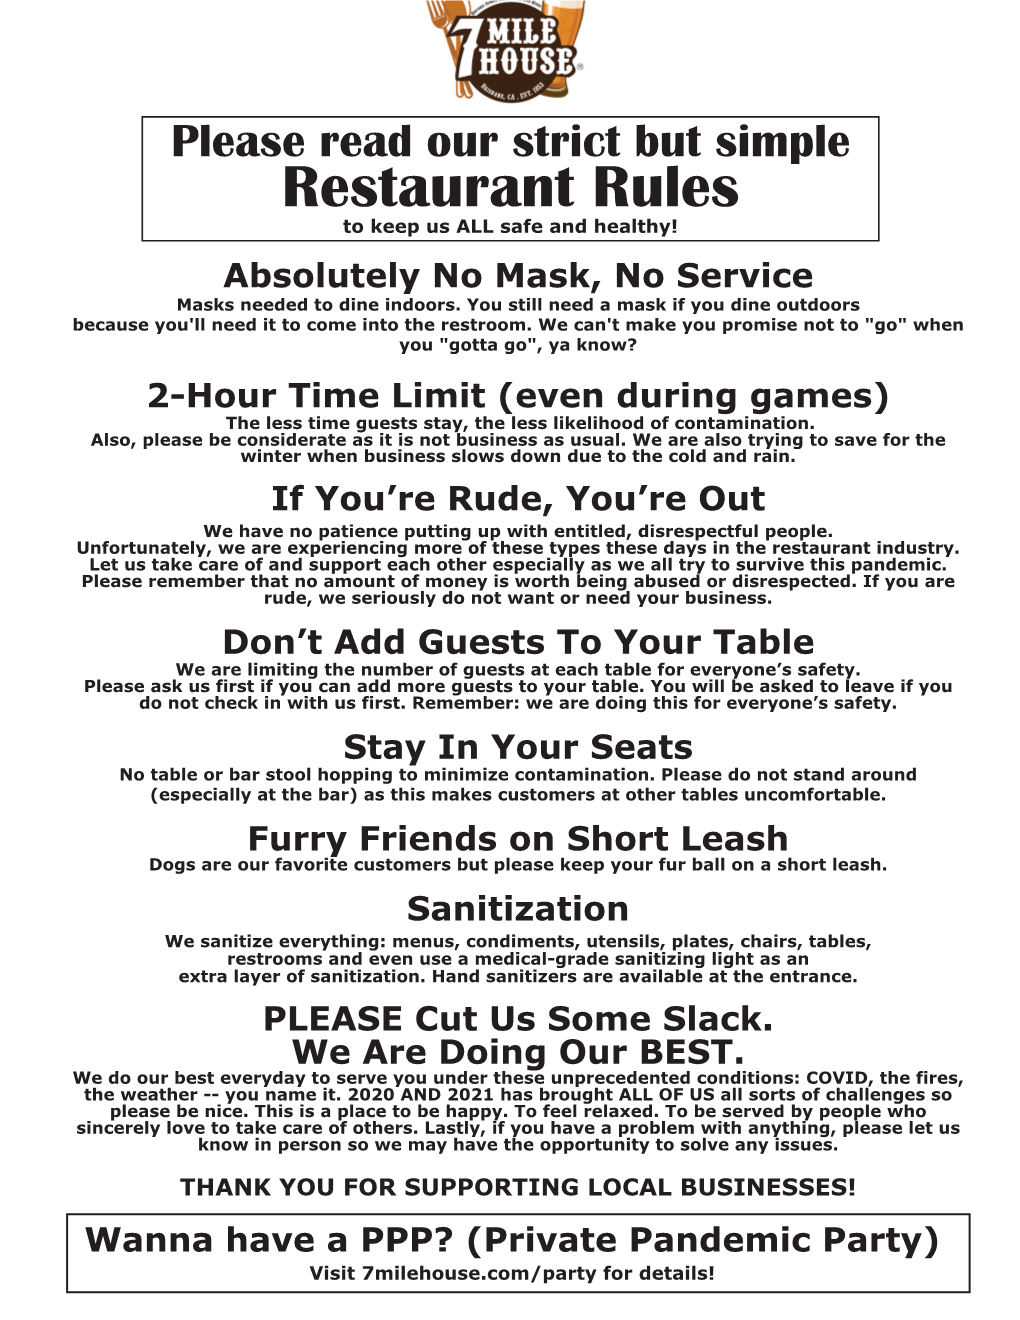 Restaurant Rules to Keep Us ALL Safe and Healthy! Absolutely No Mask, No Service Masks Needed to Dine Indoors